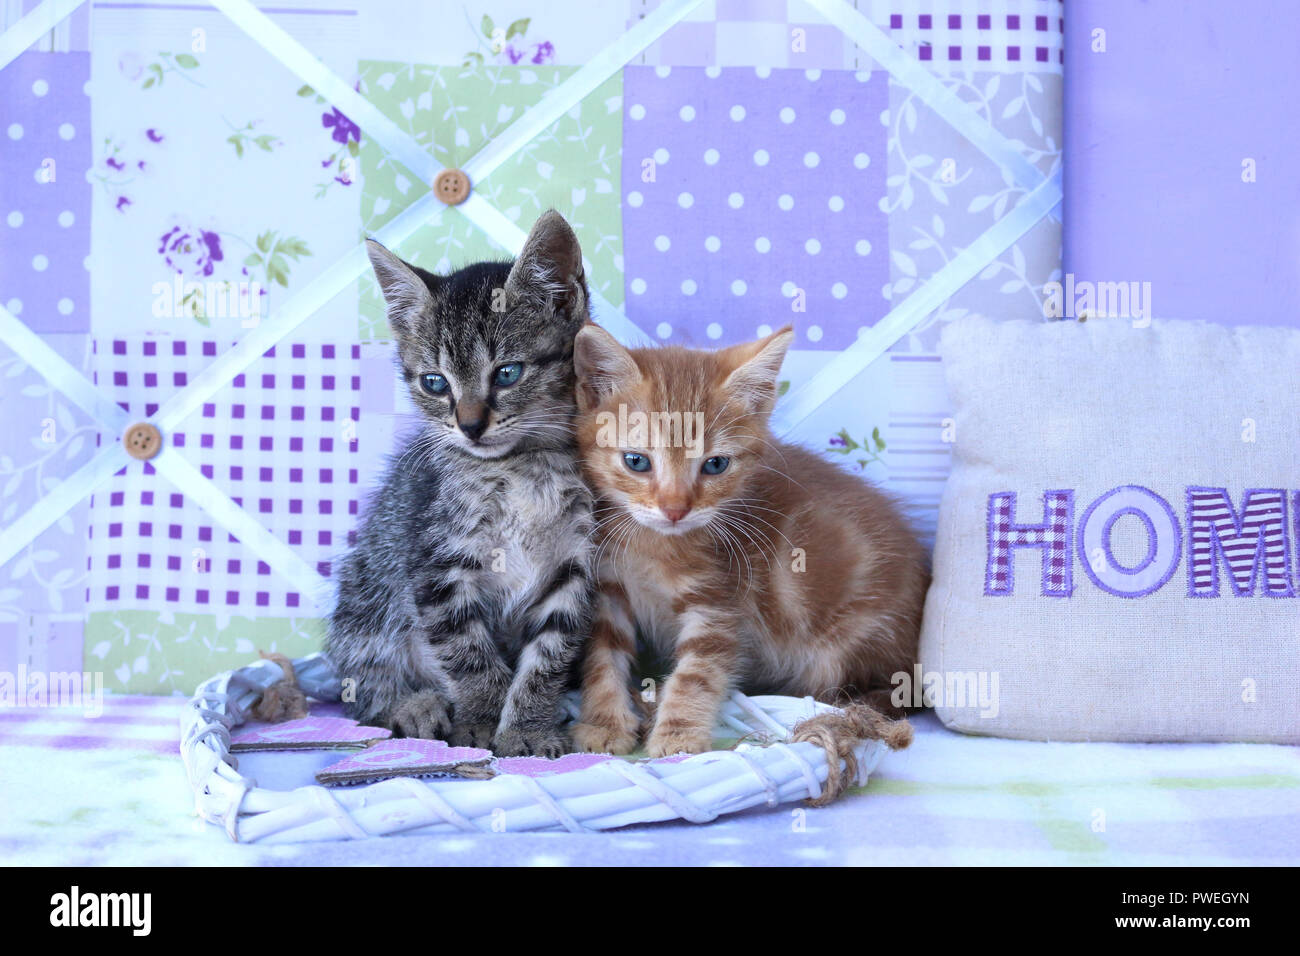 Deux chatons, 5 semaines, noir et rouge tabby tabby, proches Banque D'Images